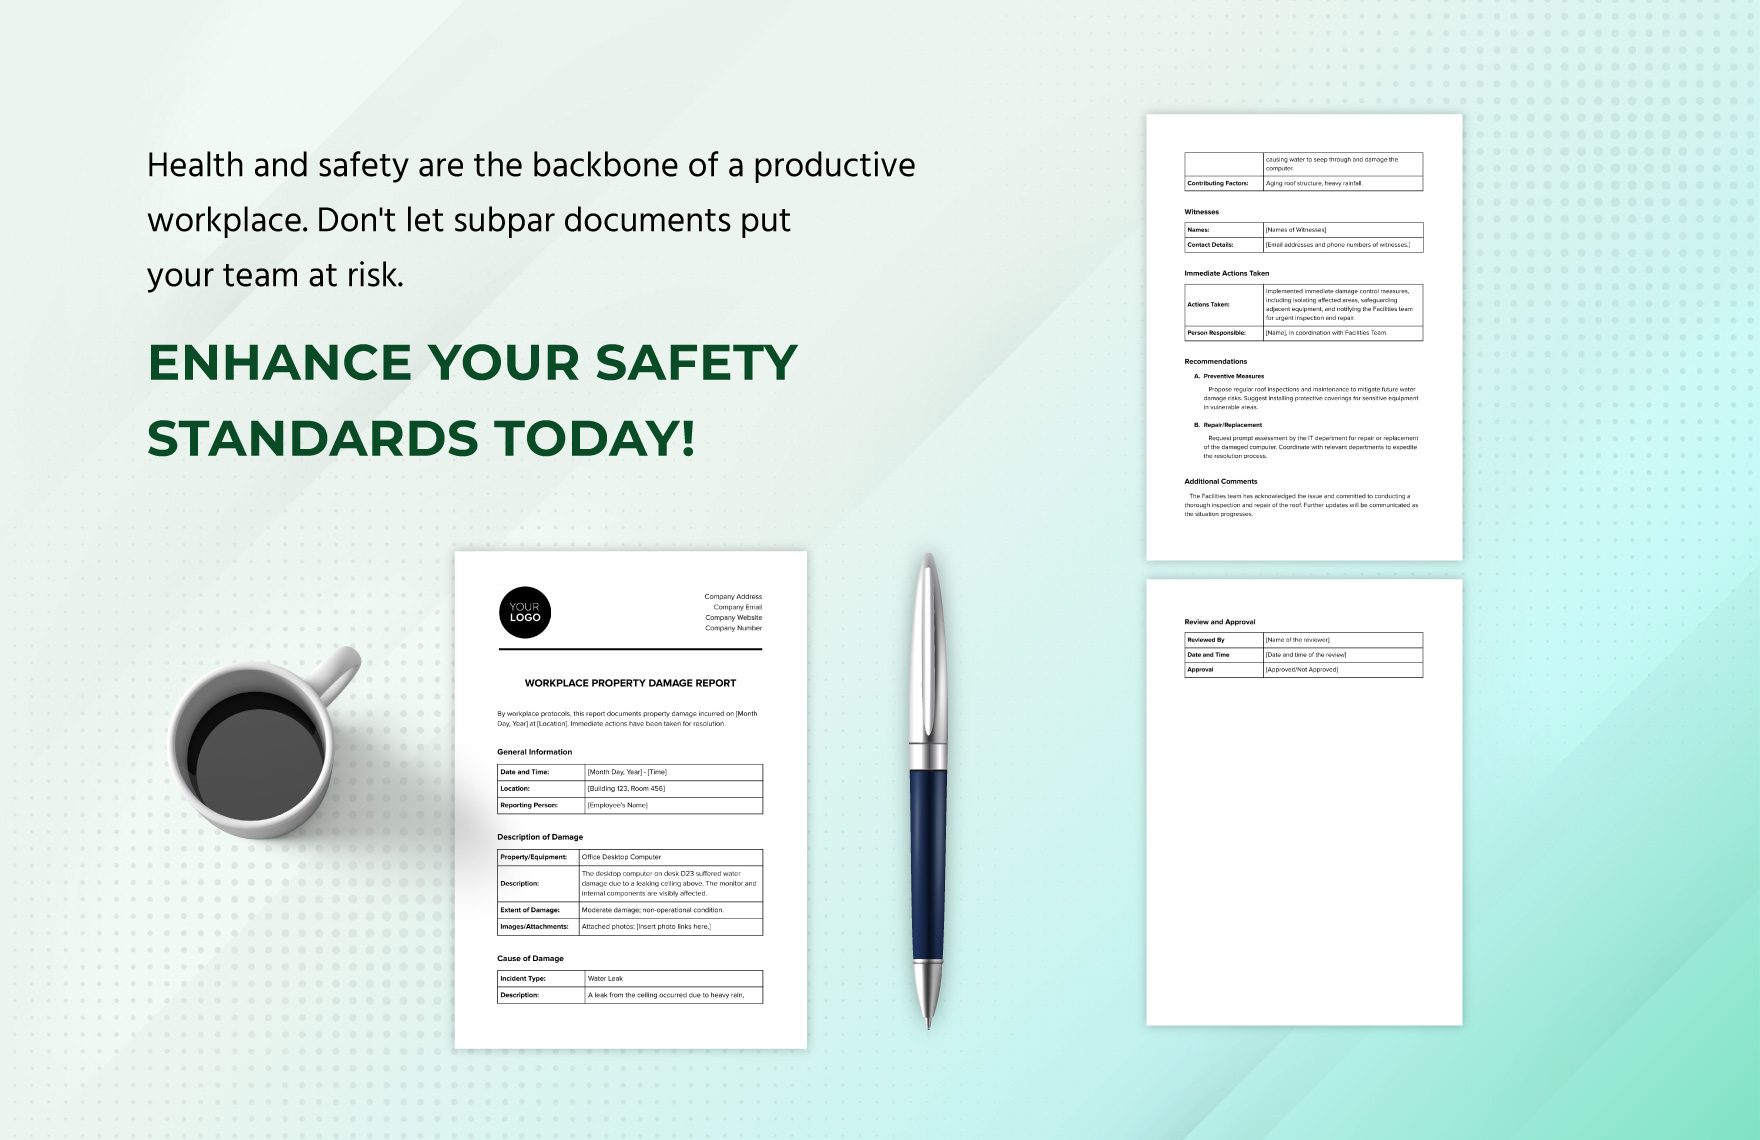 Workplace Property Damage Report Template